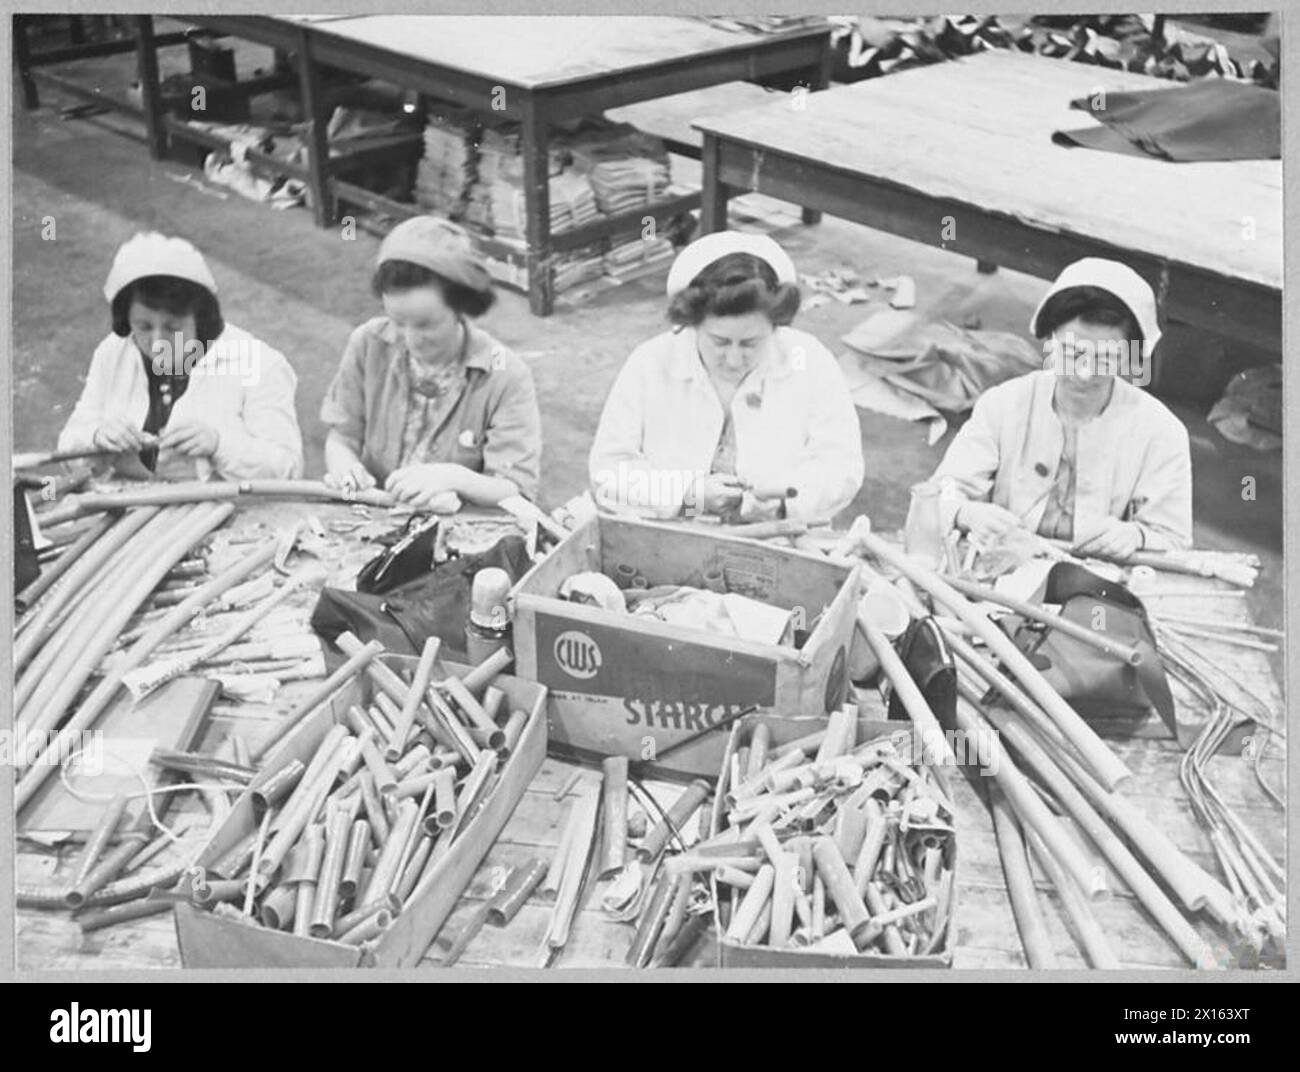 BRITAIN'S RECORD AIRCRAFT PRODUCTION ASSEMBLY OF 'WELLINGTON' BOMBERS - Women making casings for pipes and cables Royal Air Force Stock Photo